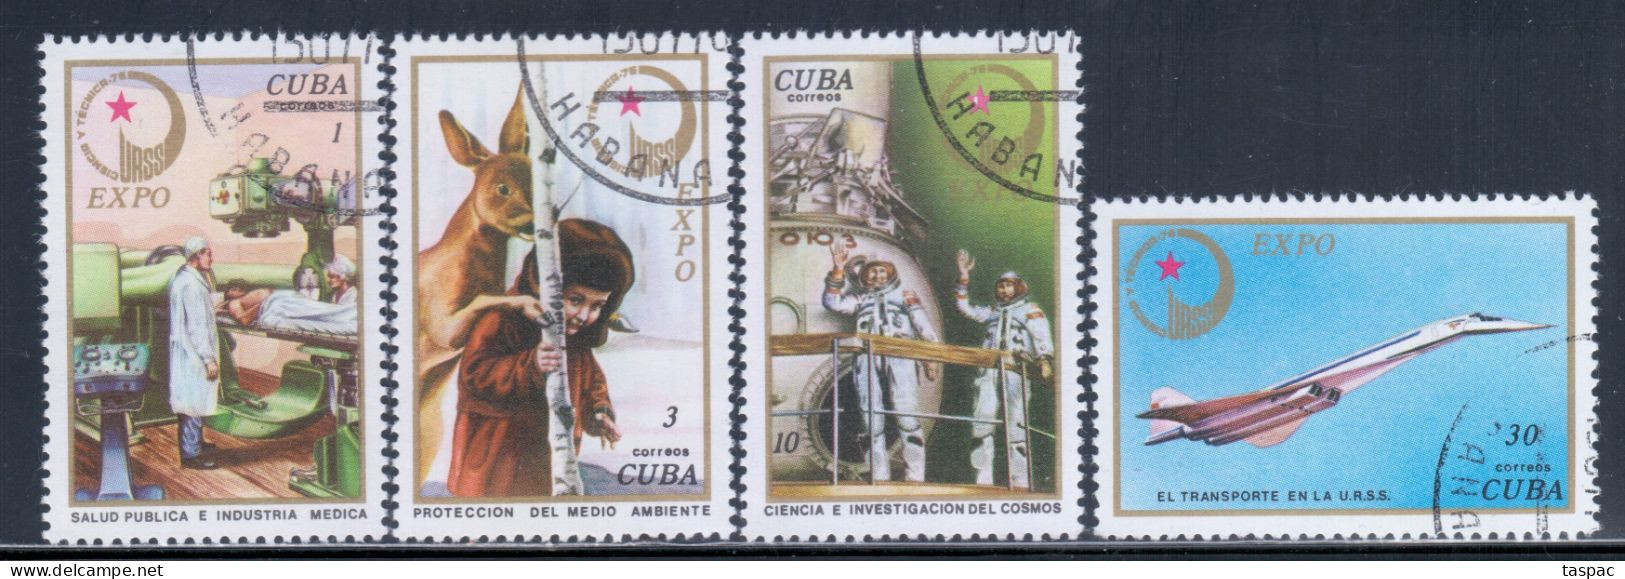 Cuba 1976 Mi# 2150-2153 Used - EXPO '76, USSR / Health, Fauna, Space, Supersonic Jet - Gebraucht